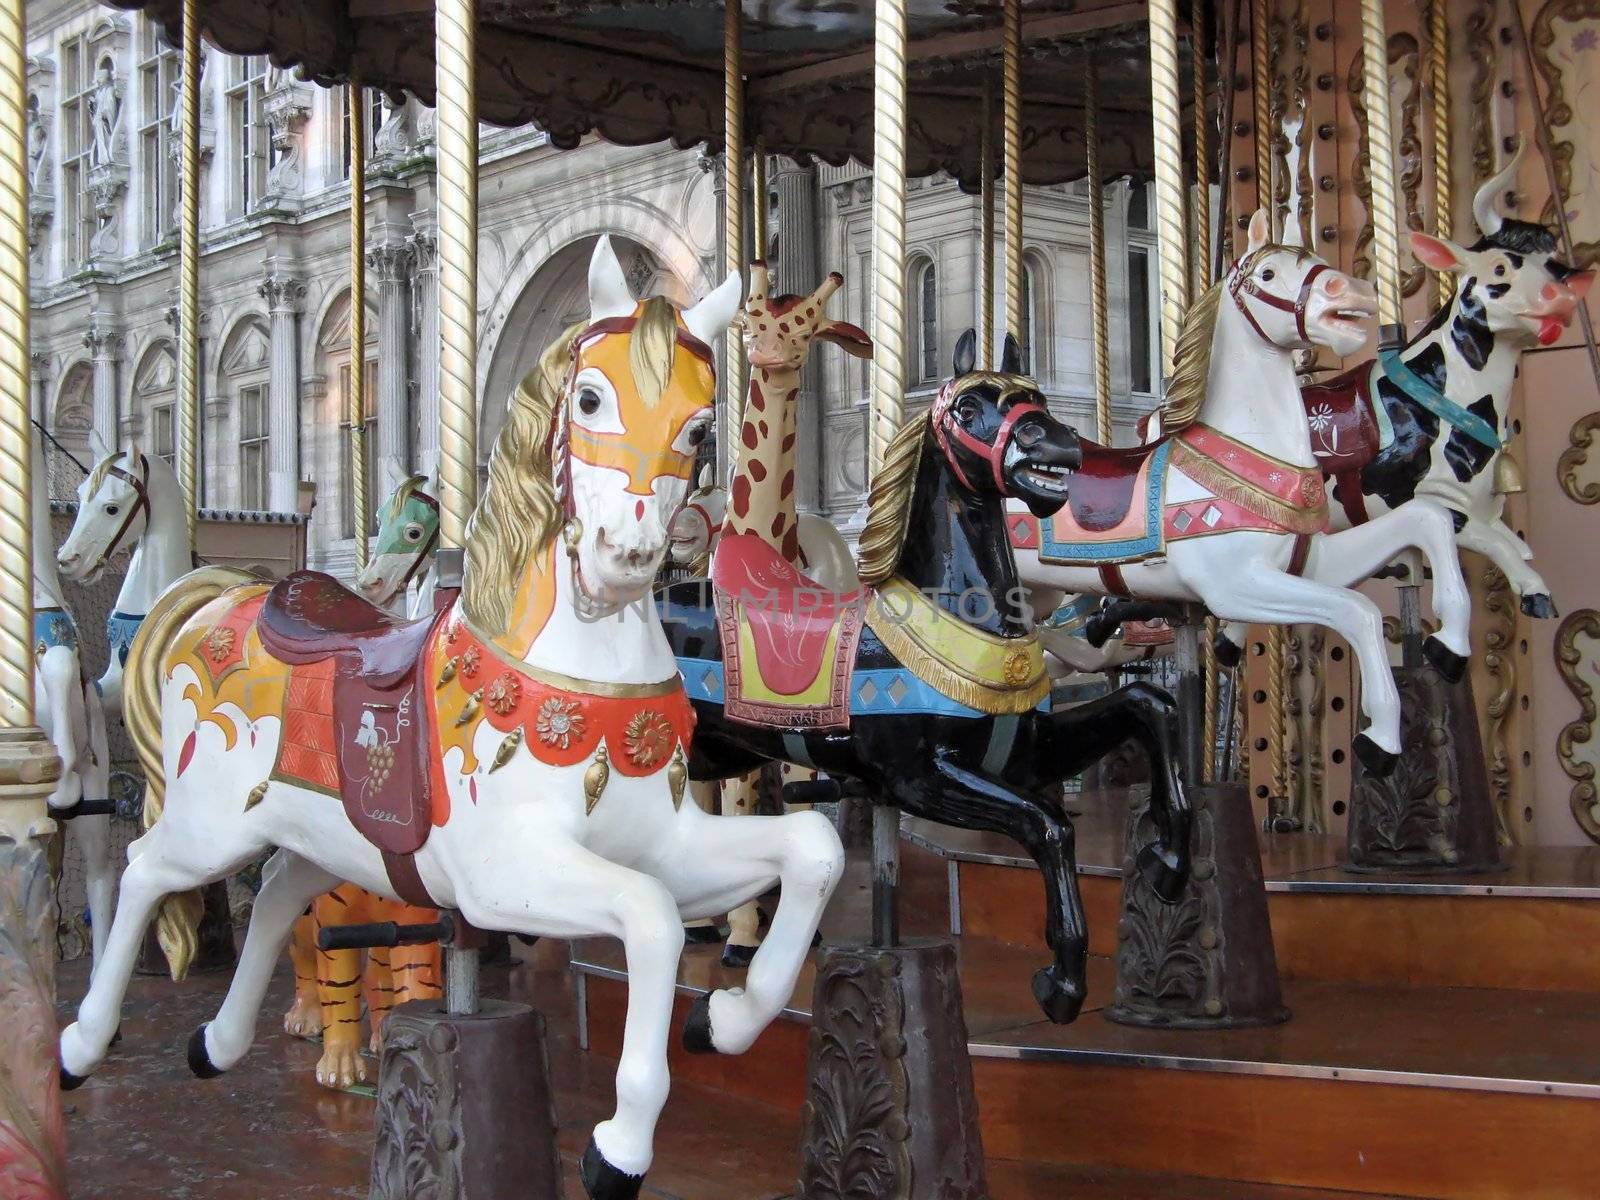 a view of some colored carousel horses